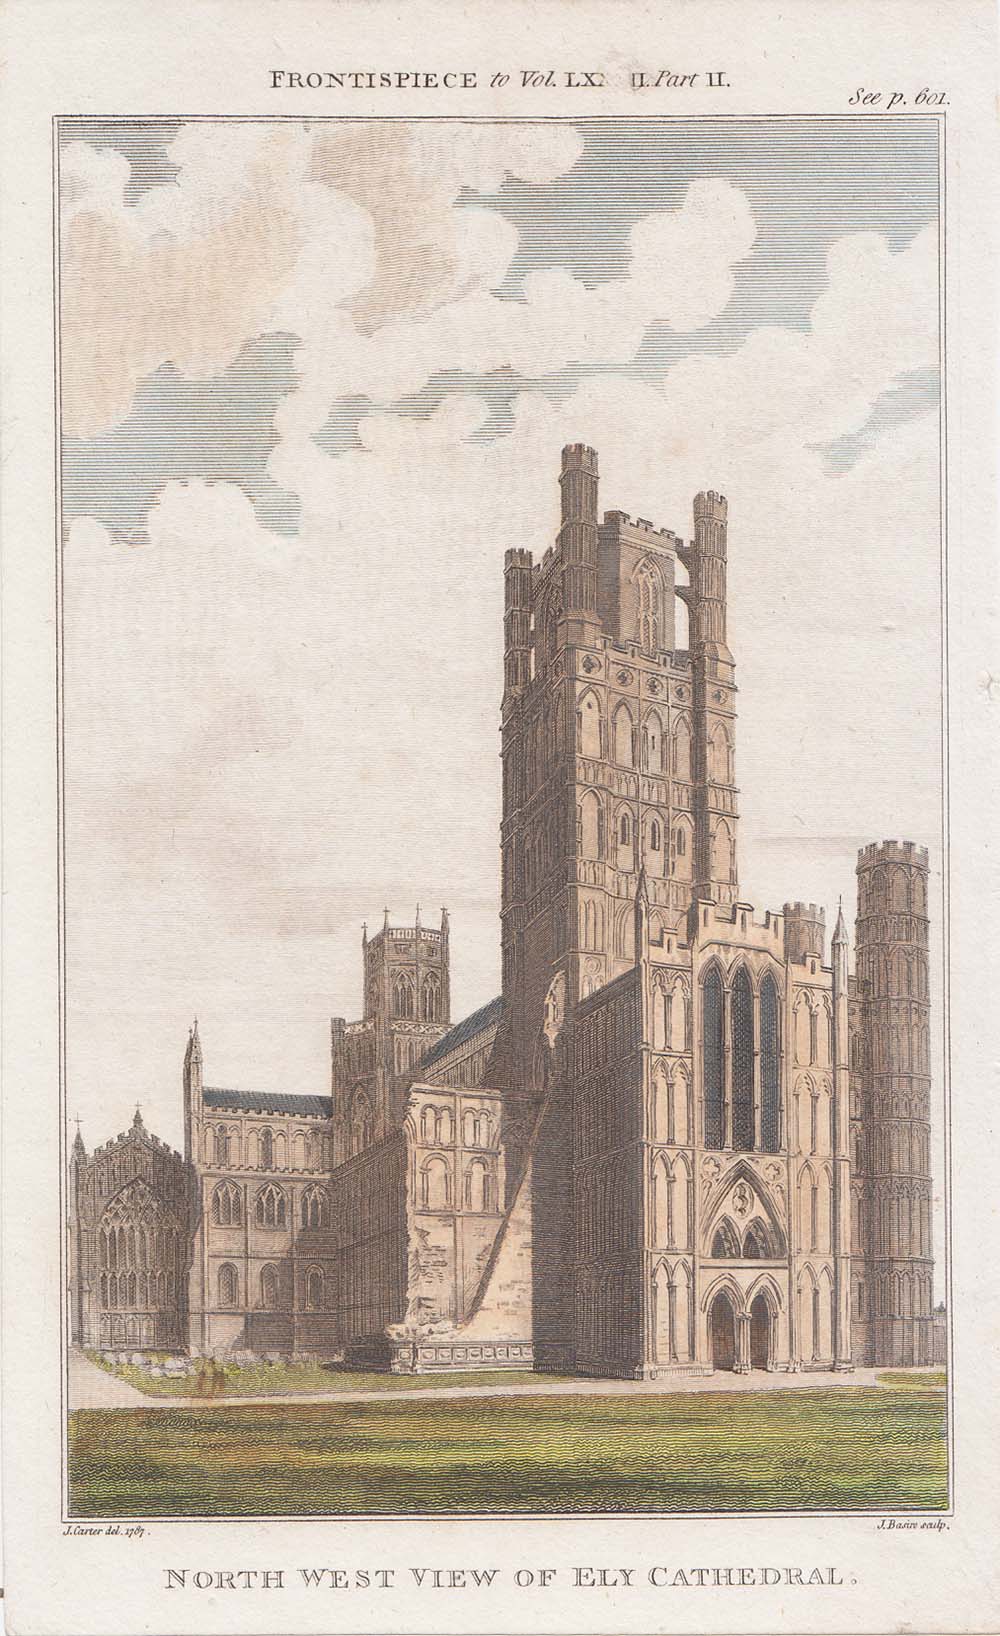 North West View of Ely Cathedral